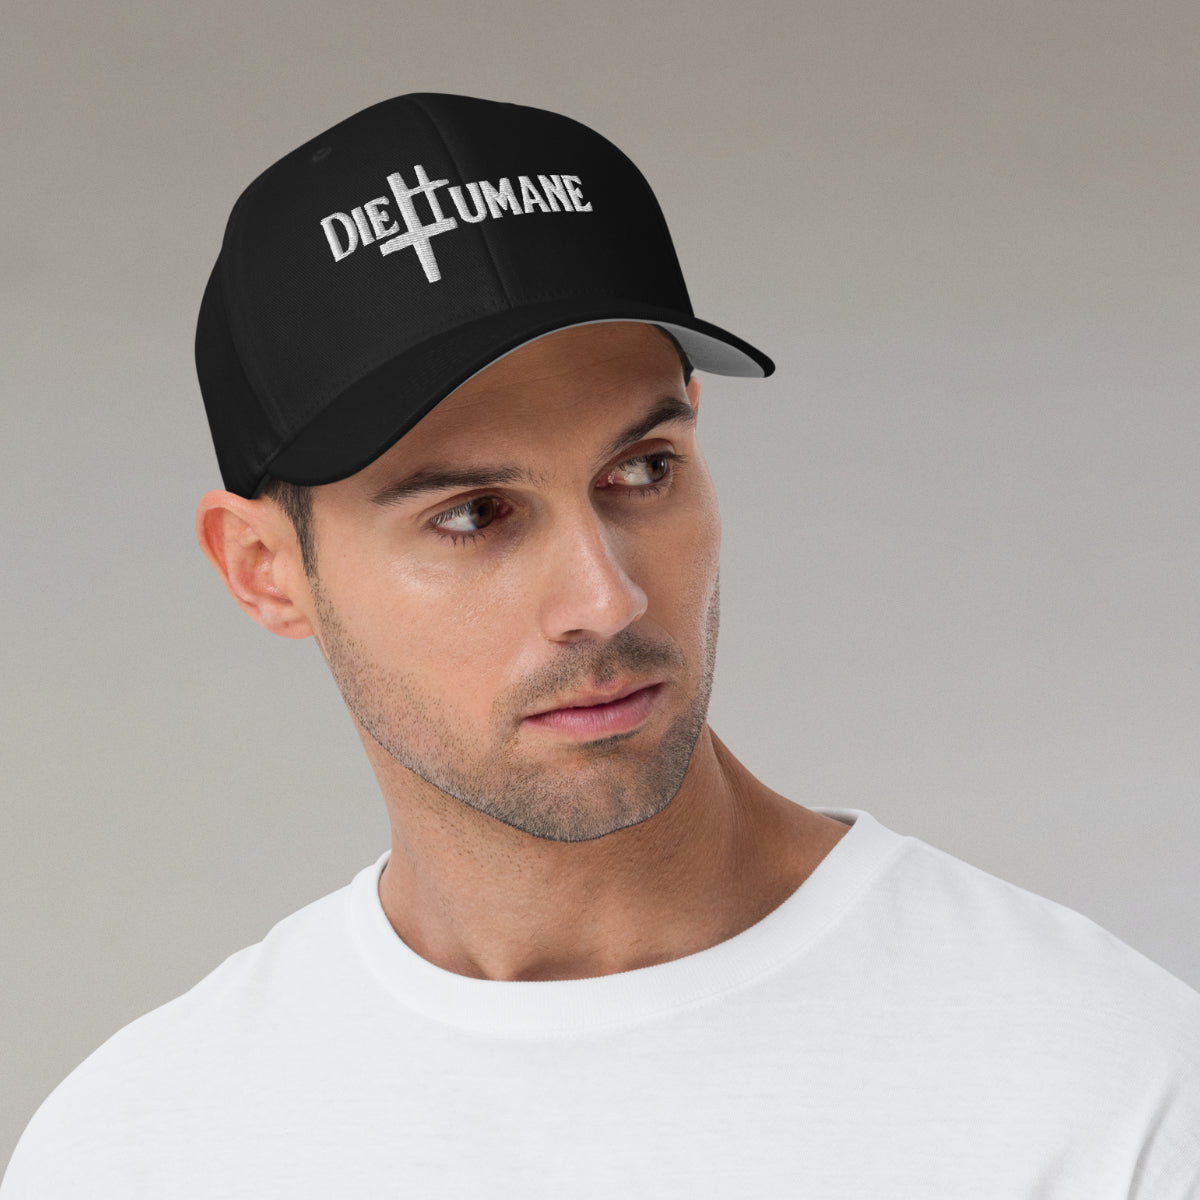 DieHumane hat. Male model with white shirt. Black baseball cap with white stitching, embroidery